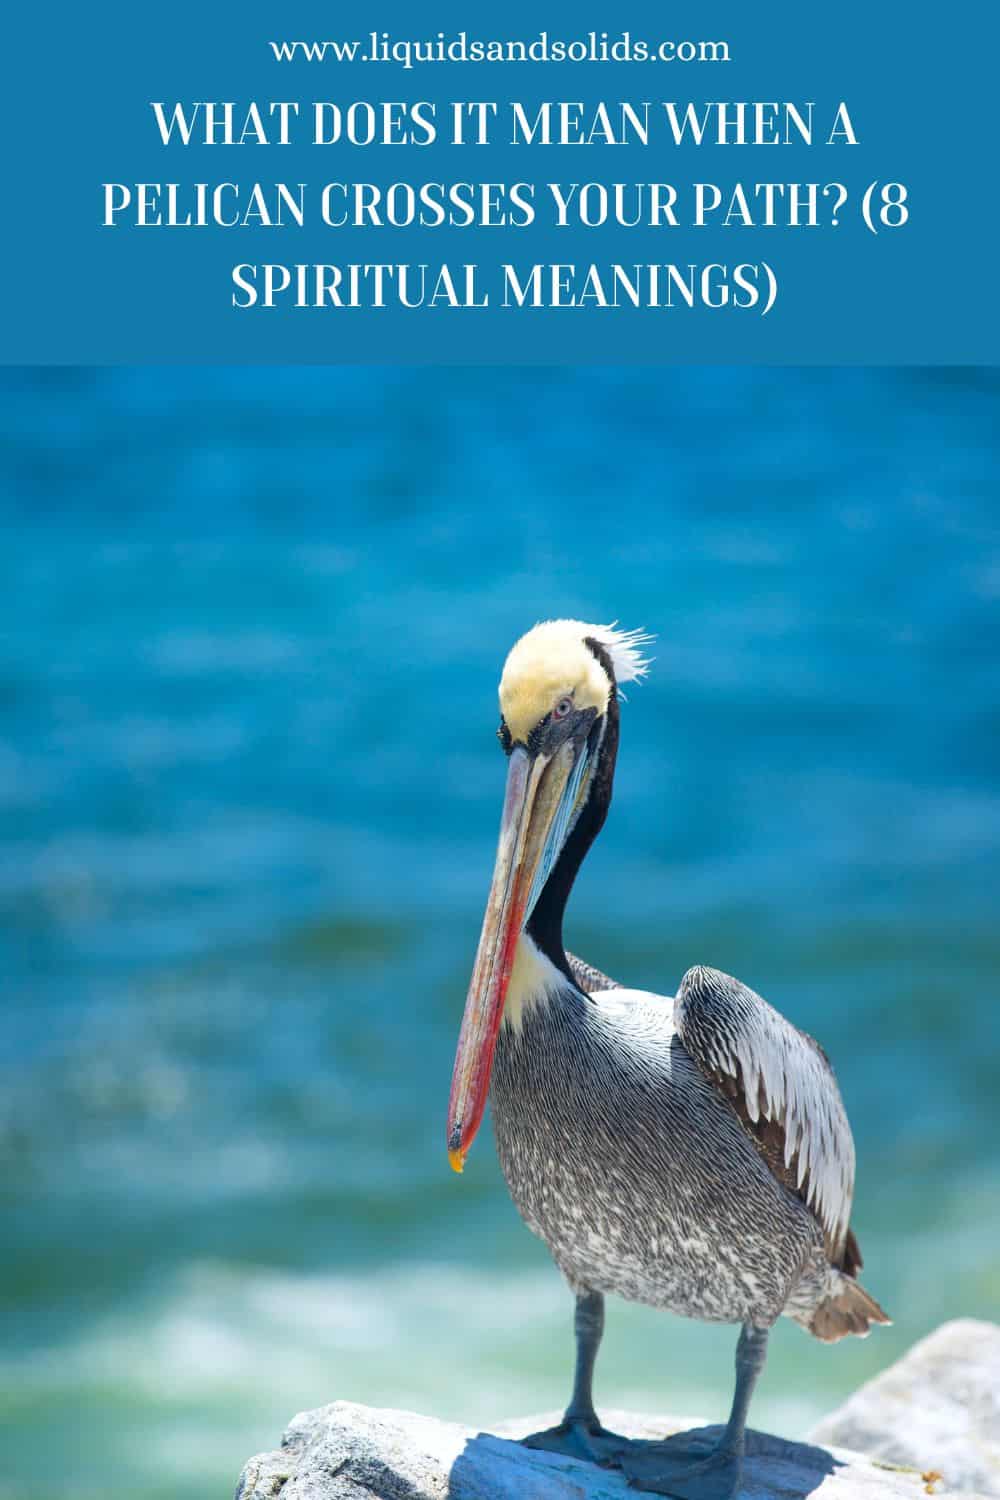 What Does It Mean When A Pelican Crosses Your Path? (8 Spiritual Meanings)